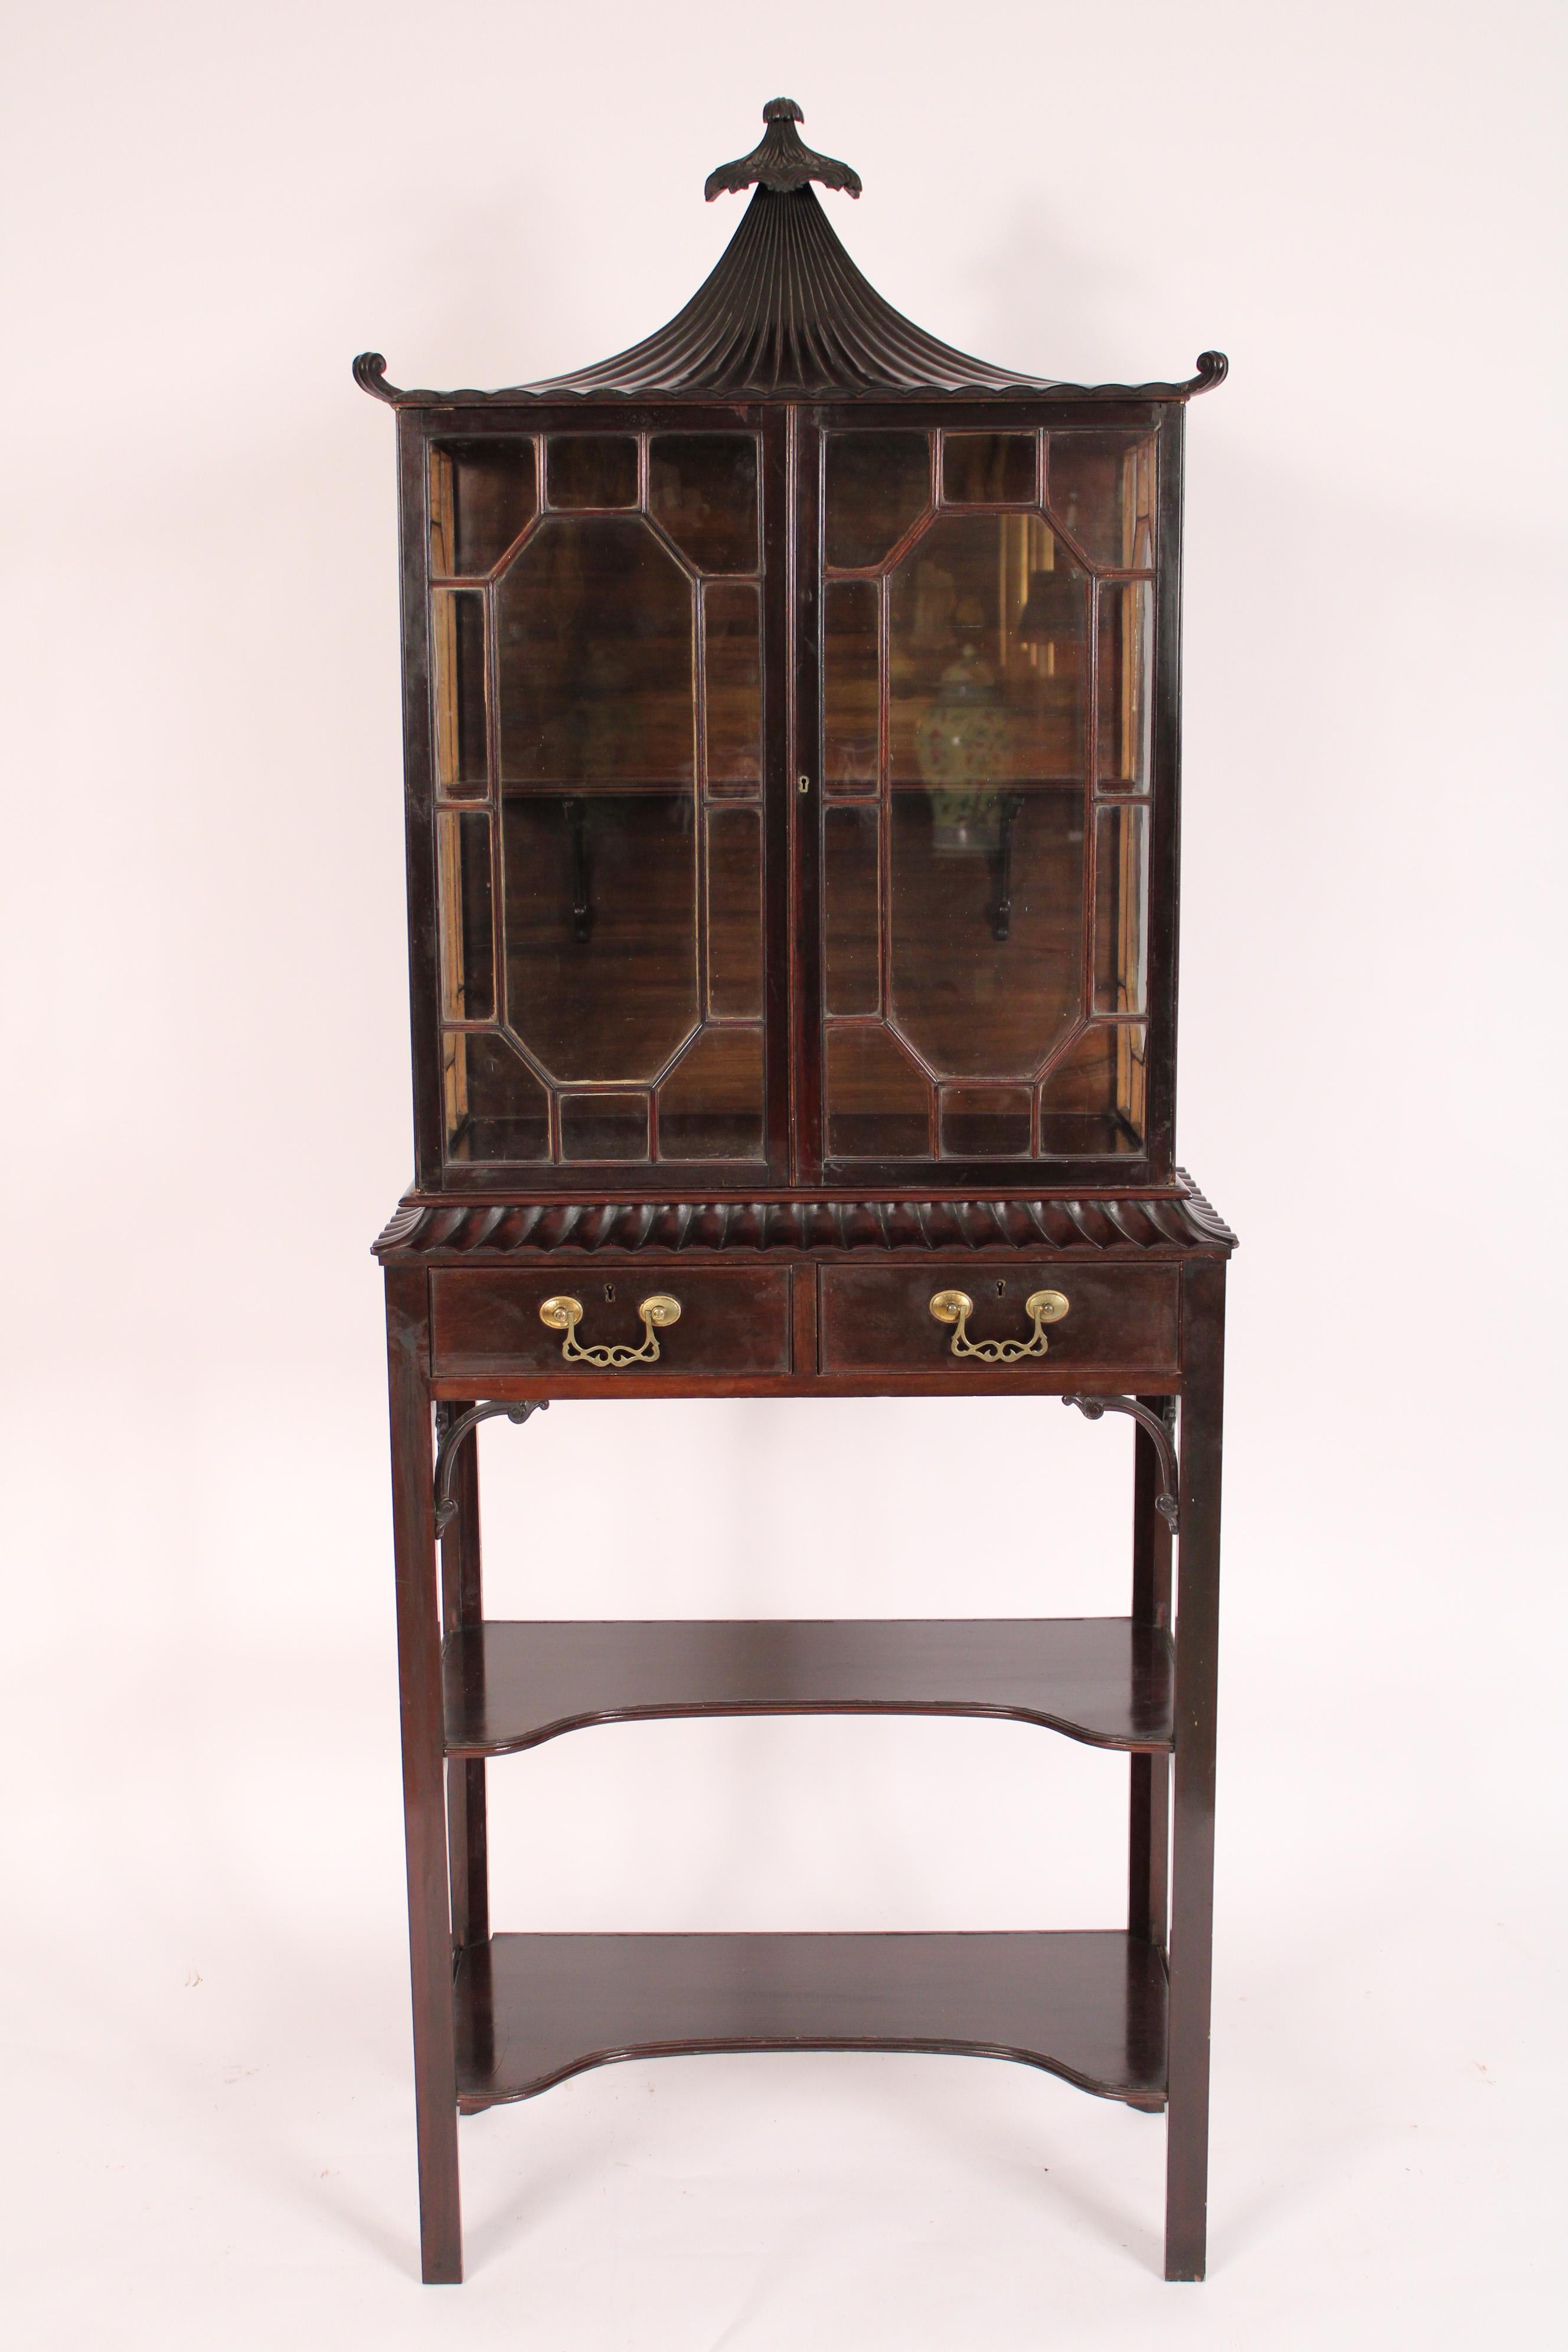 Chinese Chippendale style mahogany display / vitrine cabinet, circa 1900. Made in the Edwardian period. Excellent workmanship throughout, through mullion glass doors, finely dovetailed drawer construction, the back is attached with screws not